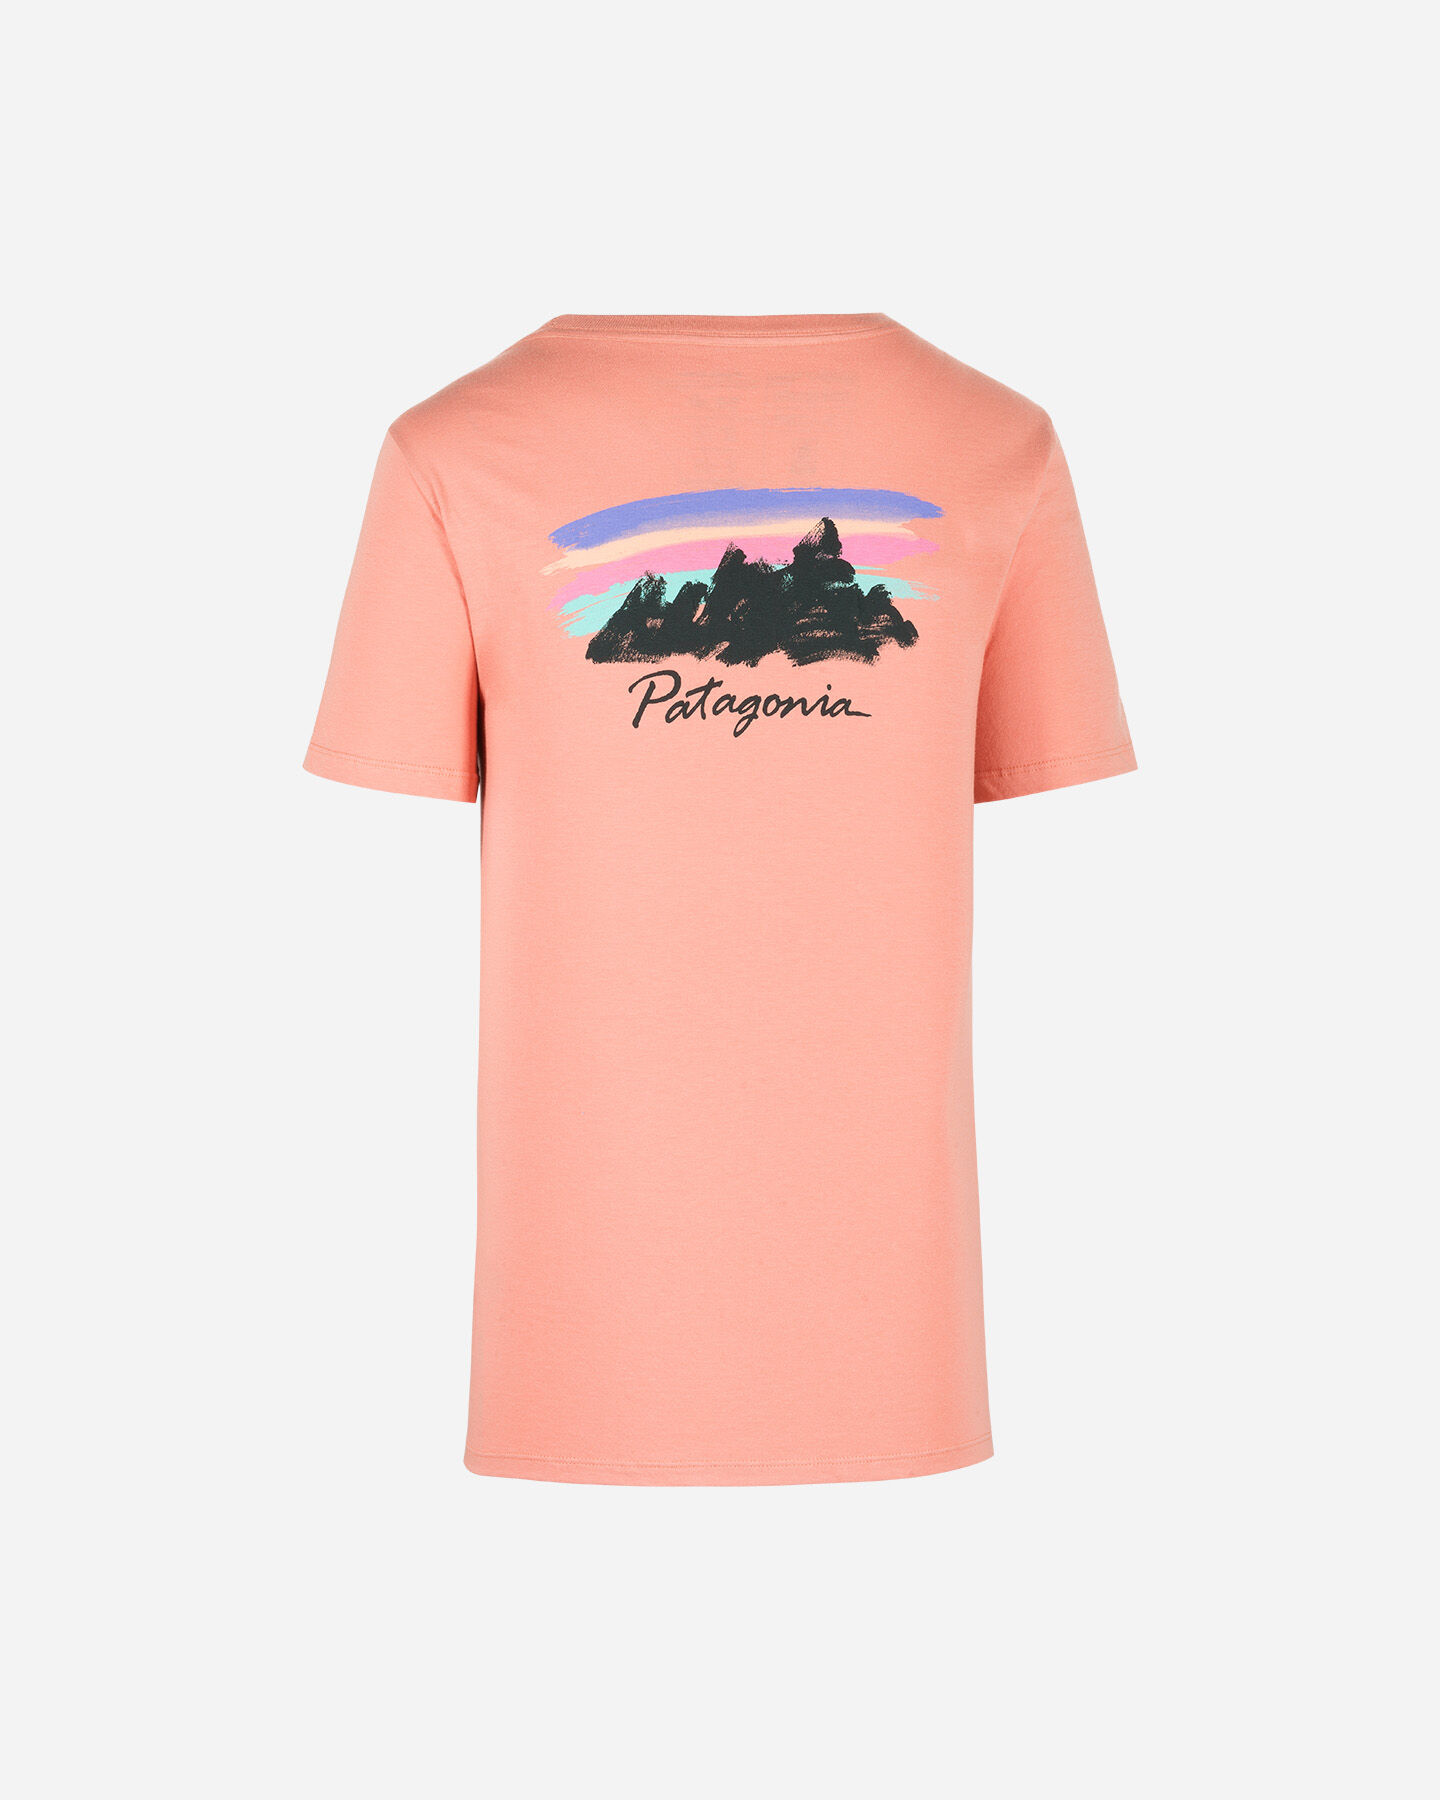  T-Shirt PATAGONIA FREE HAND W S4077594|1|XS scatto 1